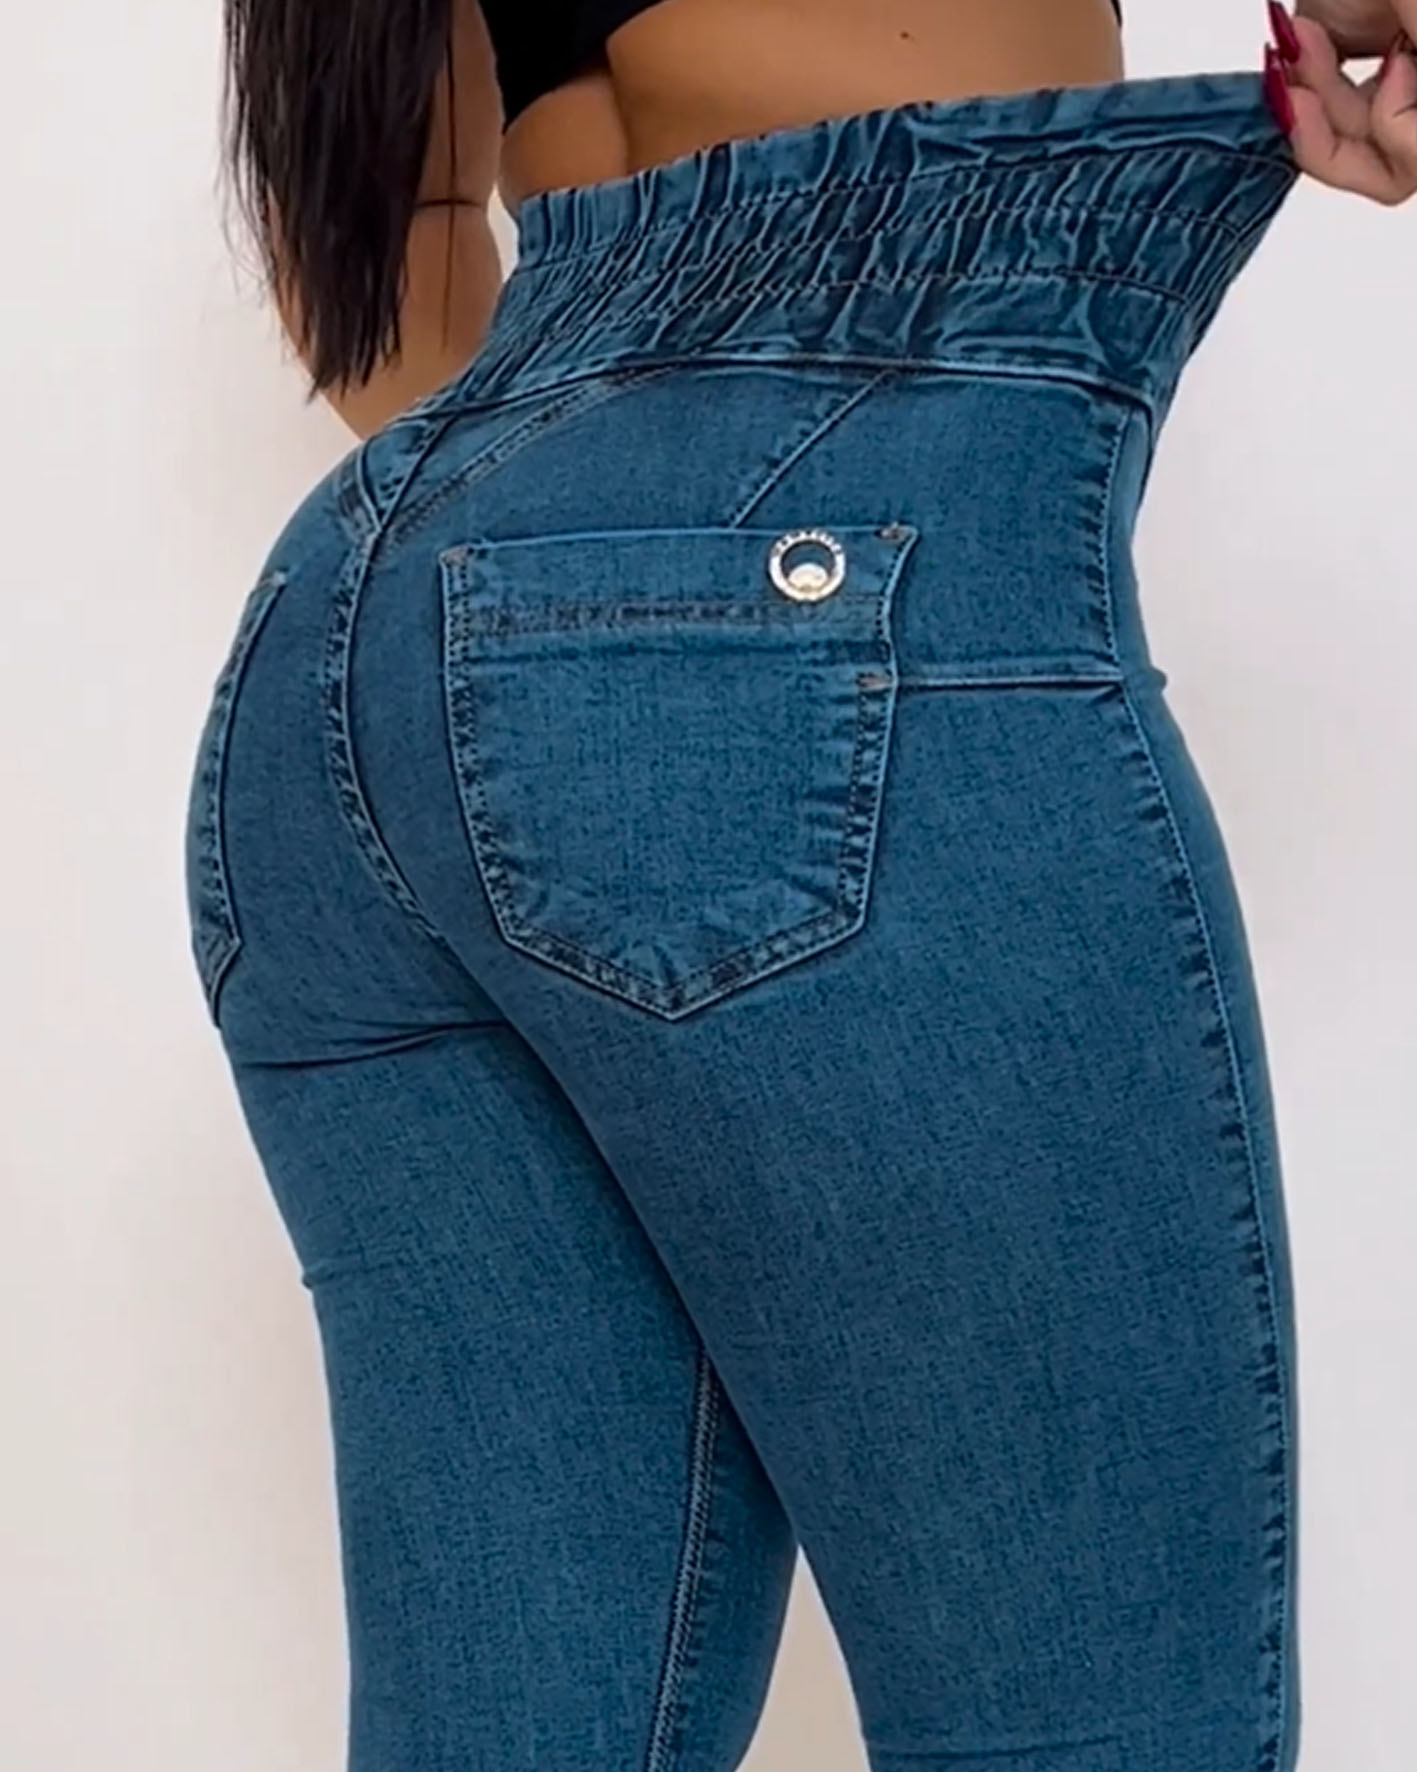 ChicCurve Stretch Elastic High Waisted Jeans